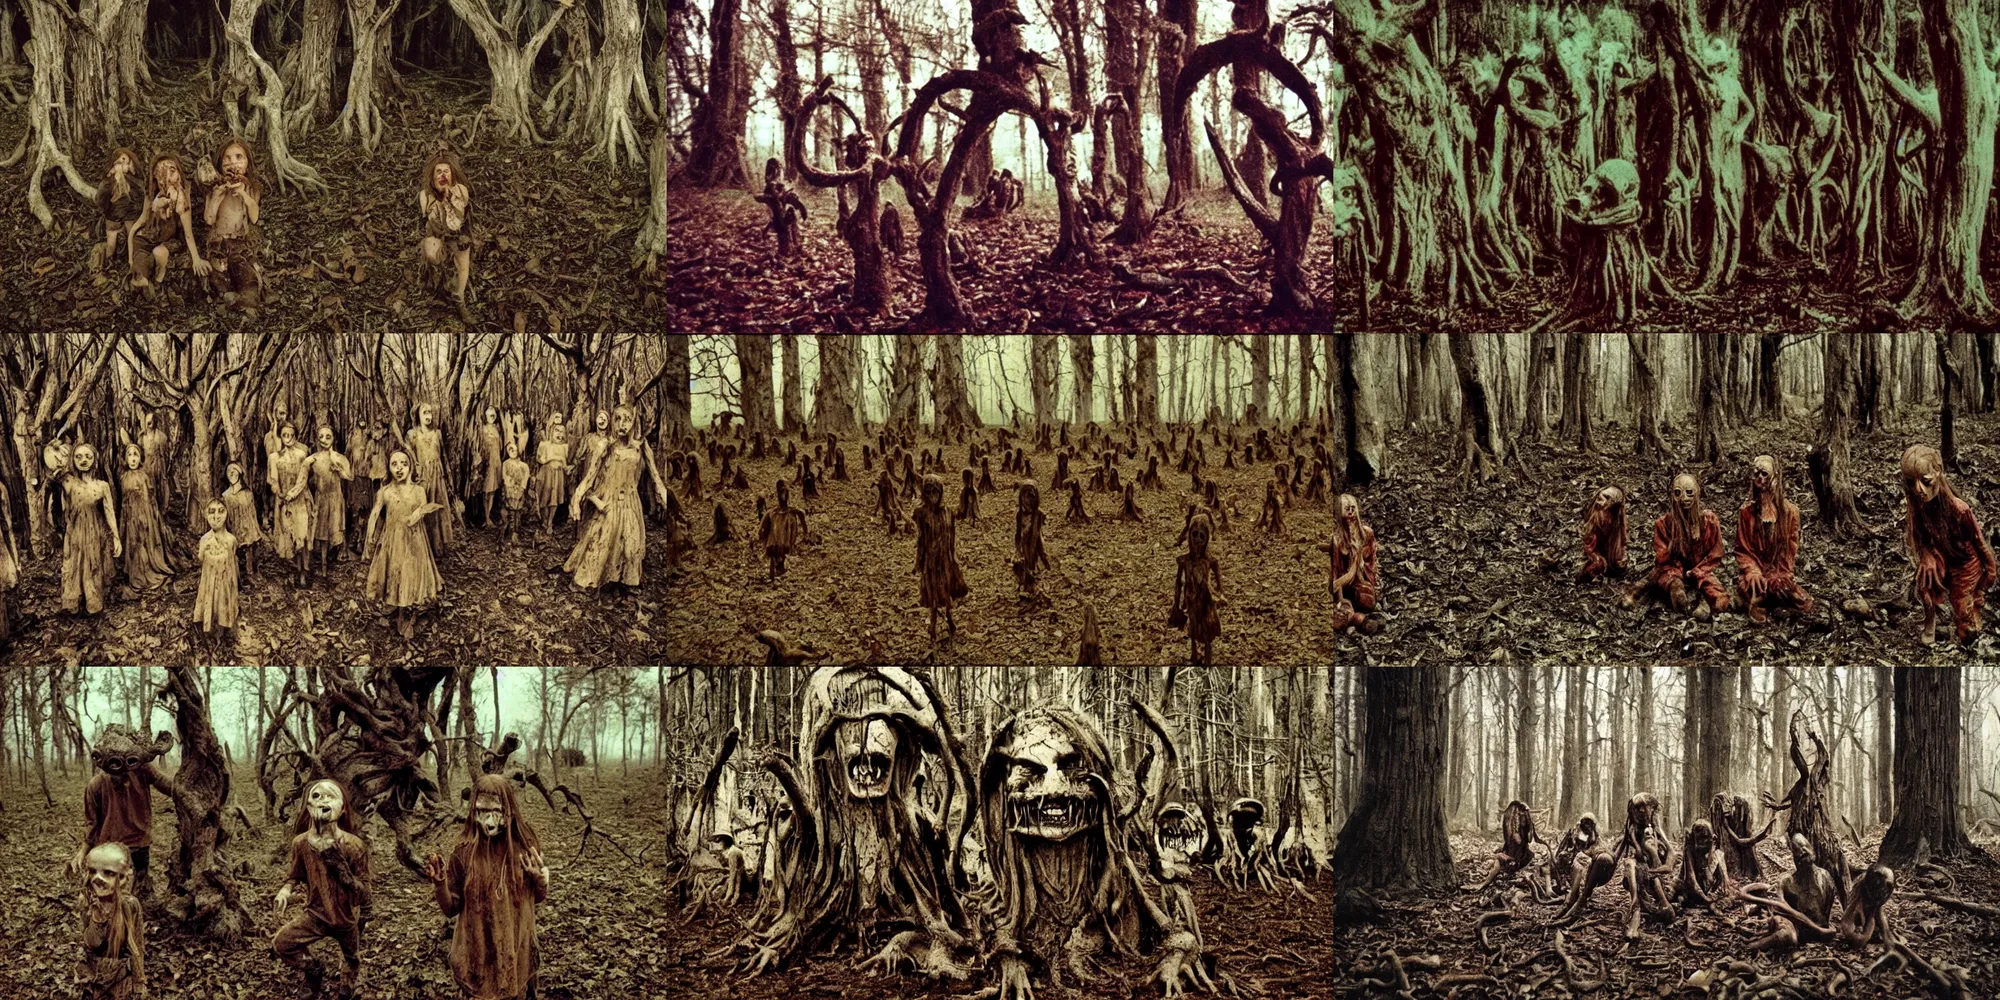 Prompt: mushroom - eating demonic children, critical moment, terrifying tortured tree monsters with distorted pained faces made of bark, lovecratftian horror, pans labyrinth, liminal, nightmare inducing, haunted, low quality grainy, shot on expired kodak film